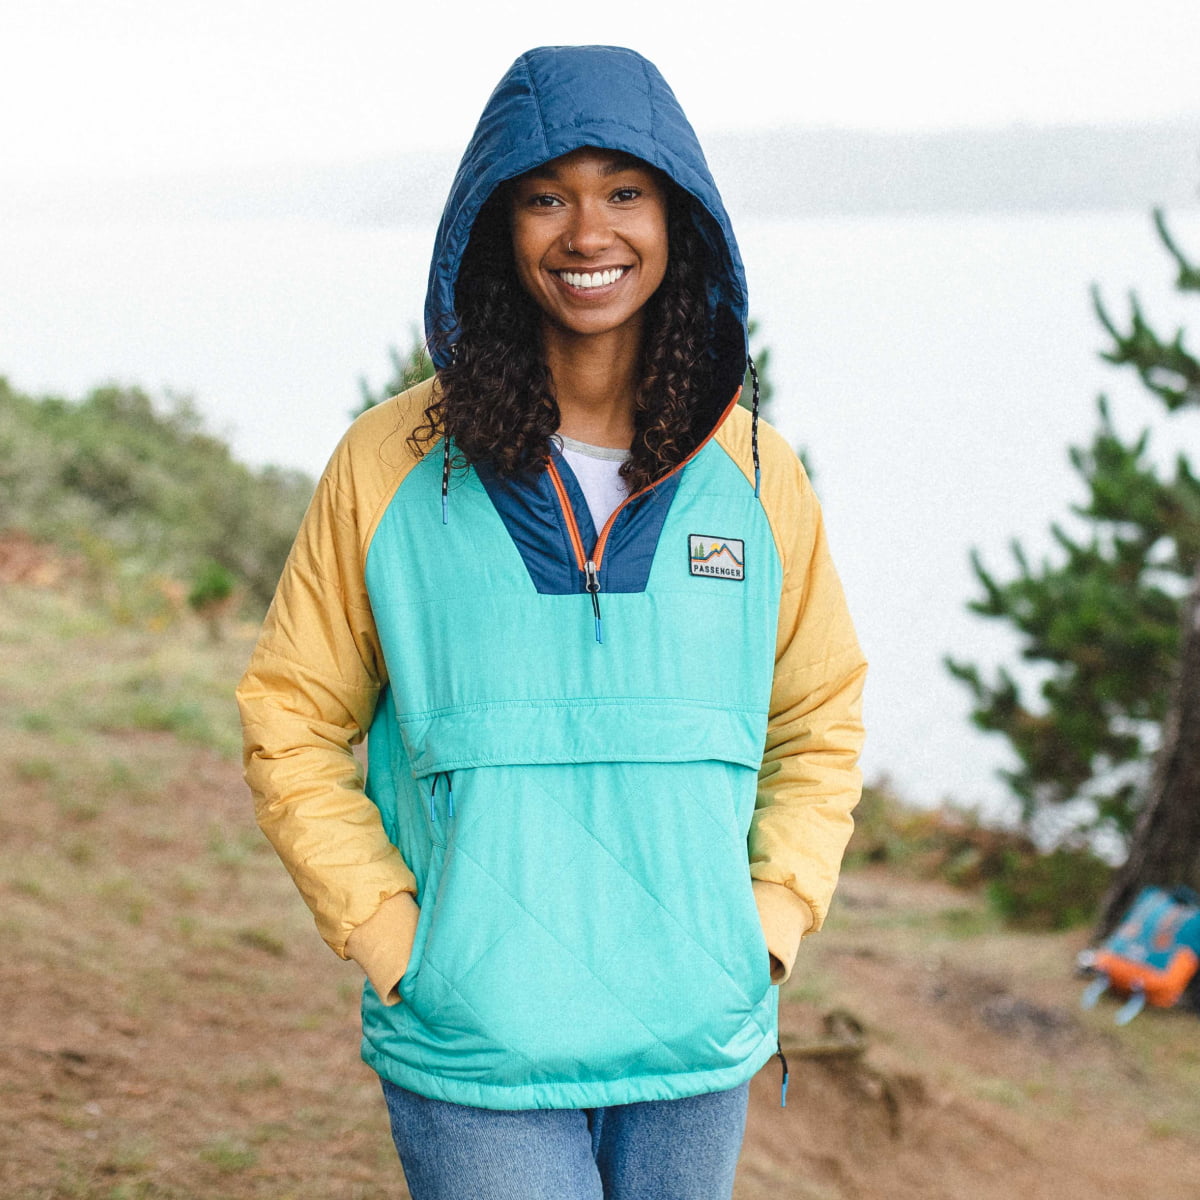 Ocean Recycled Insulated 1/2 Zip Jacket - Blue Turquoise